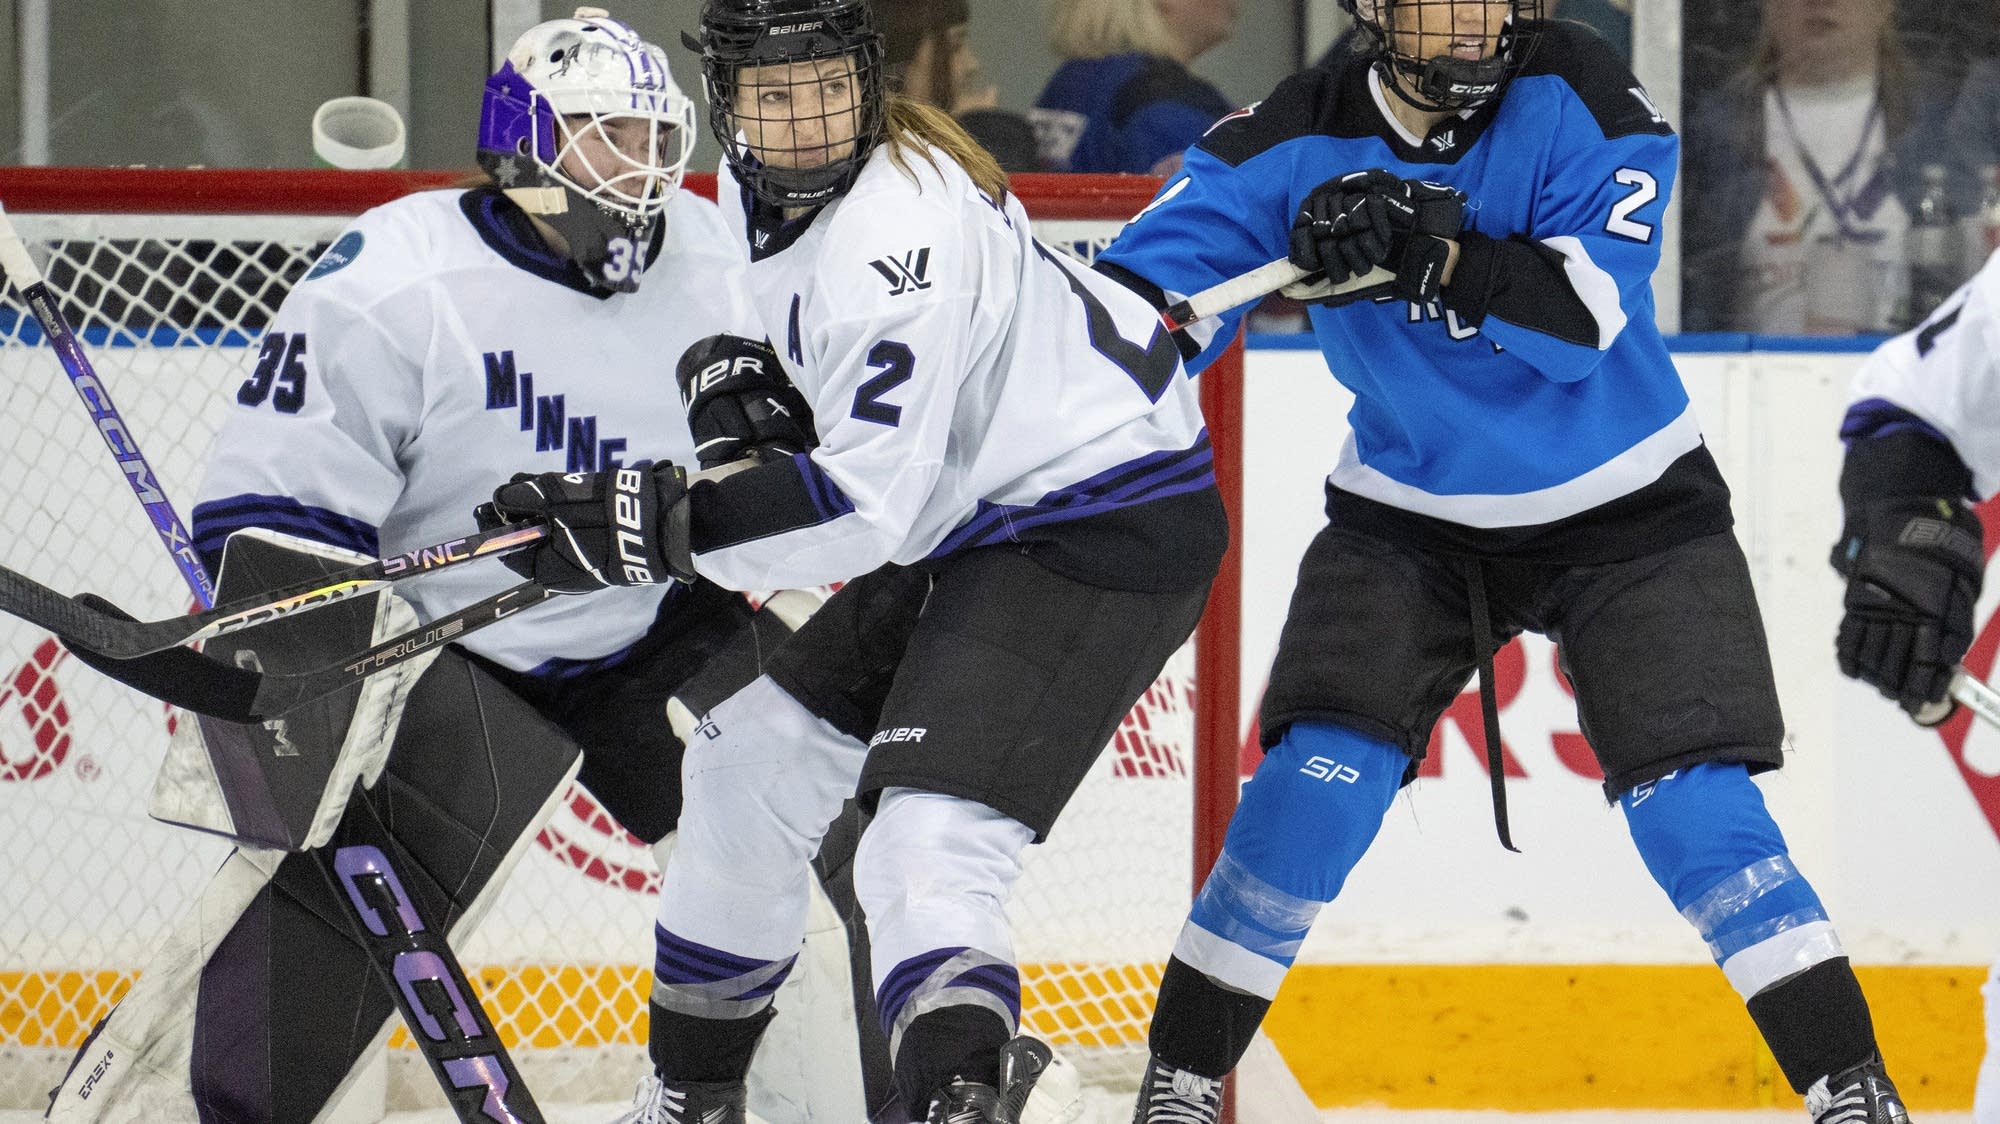 Toronto clinches top spot in PWHL with 4-1 win over Minnesota